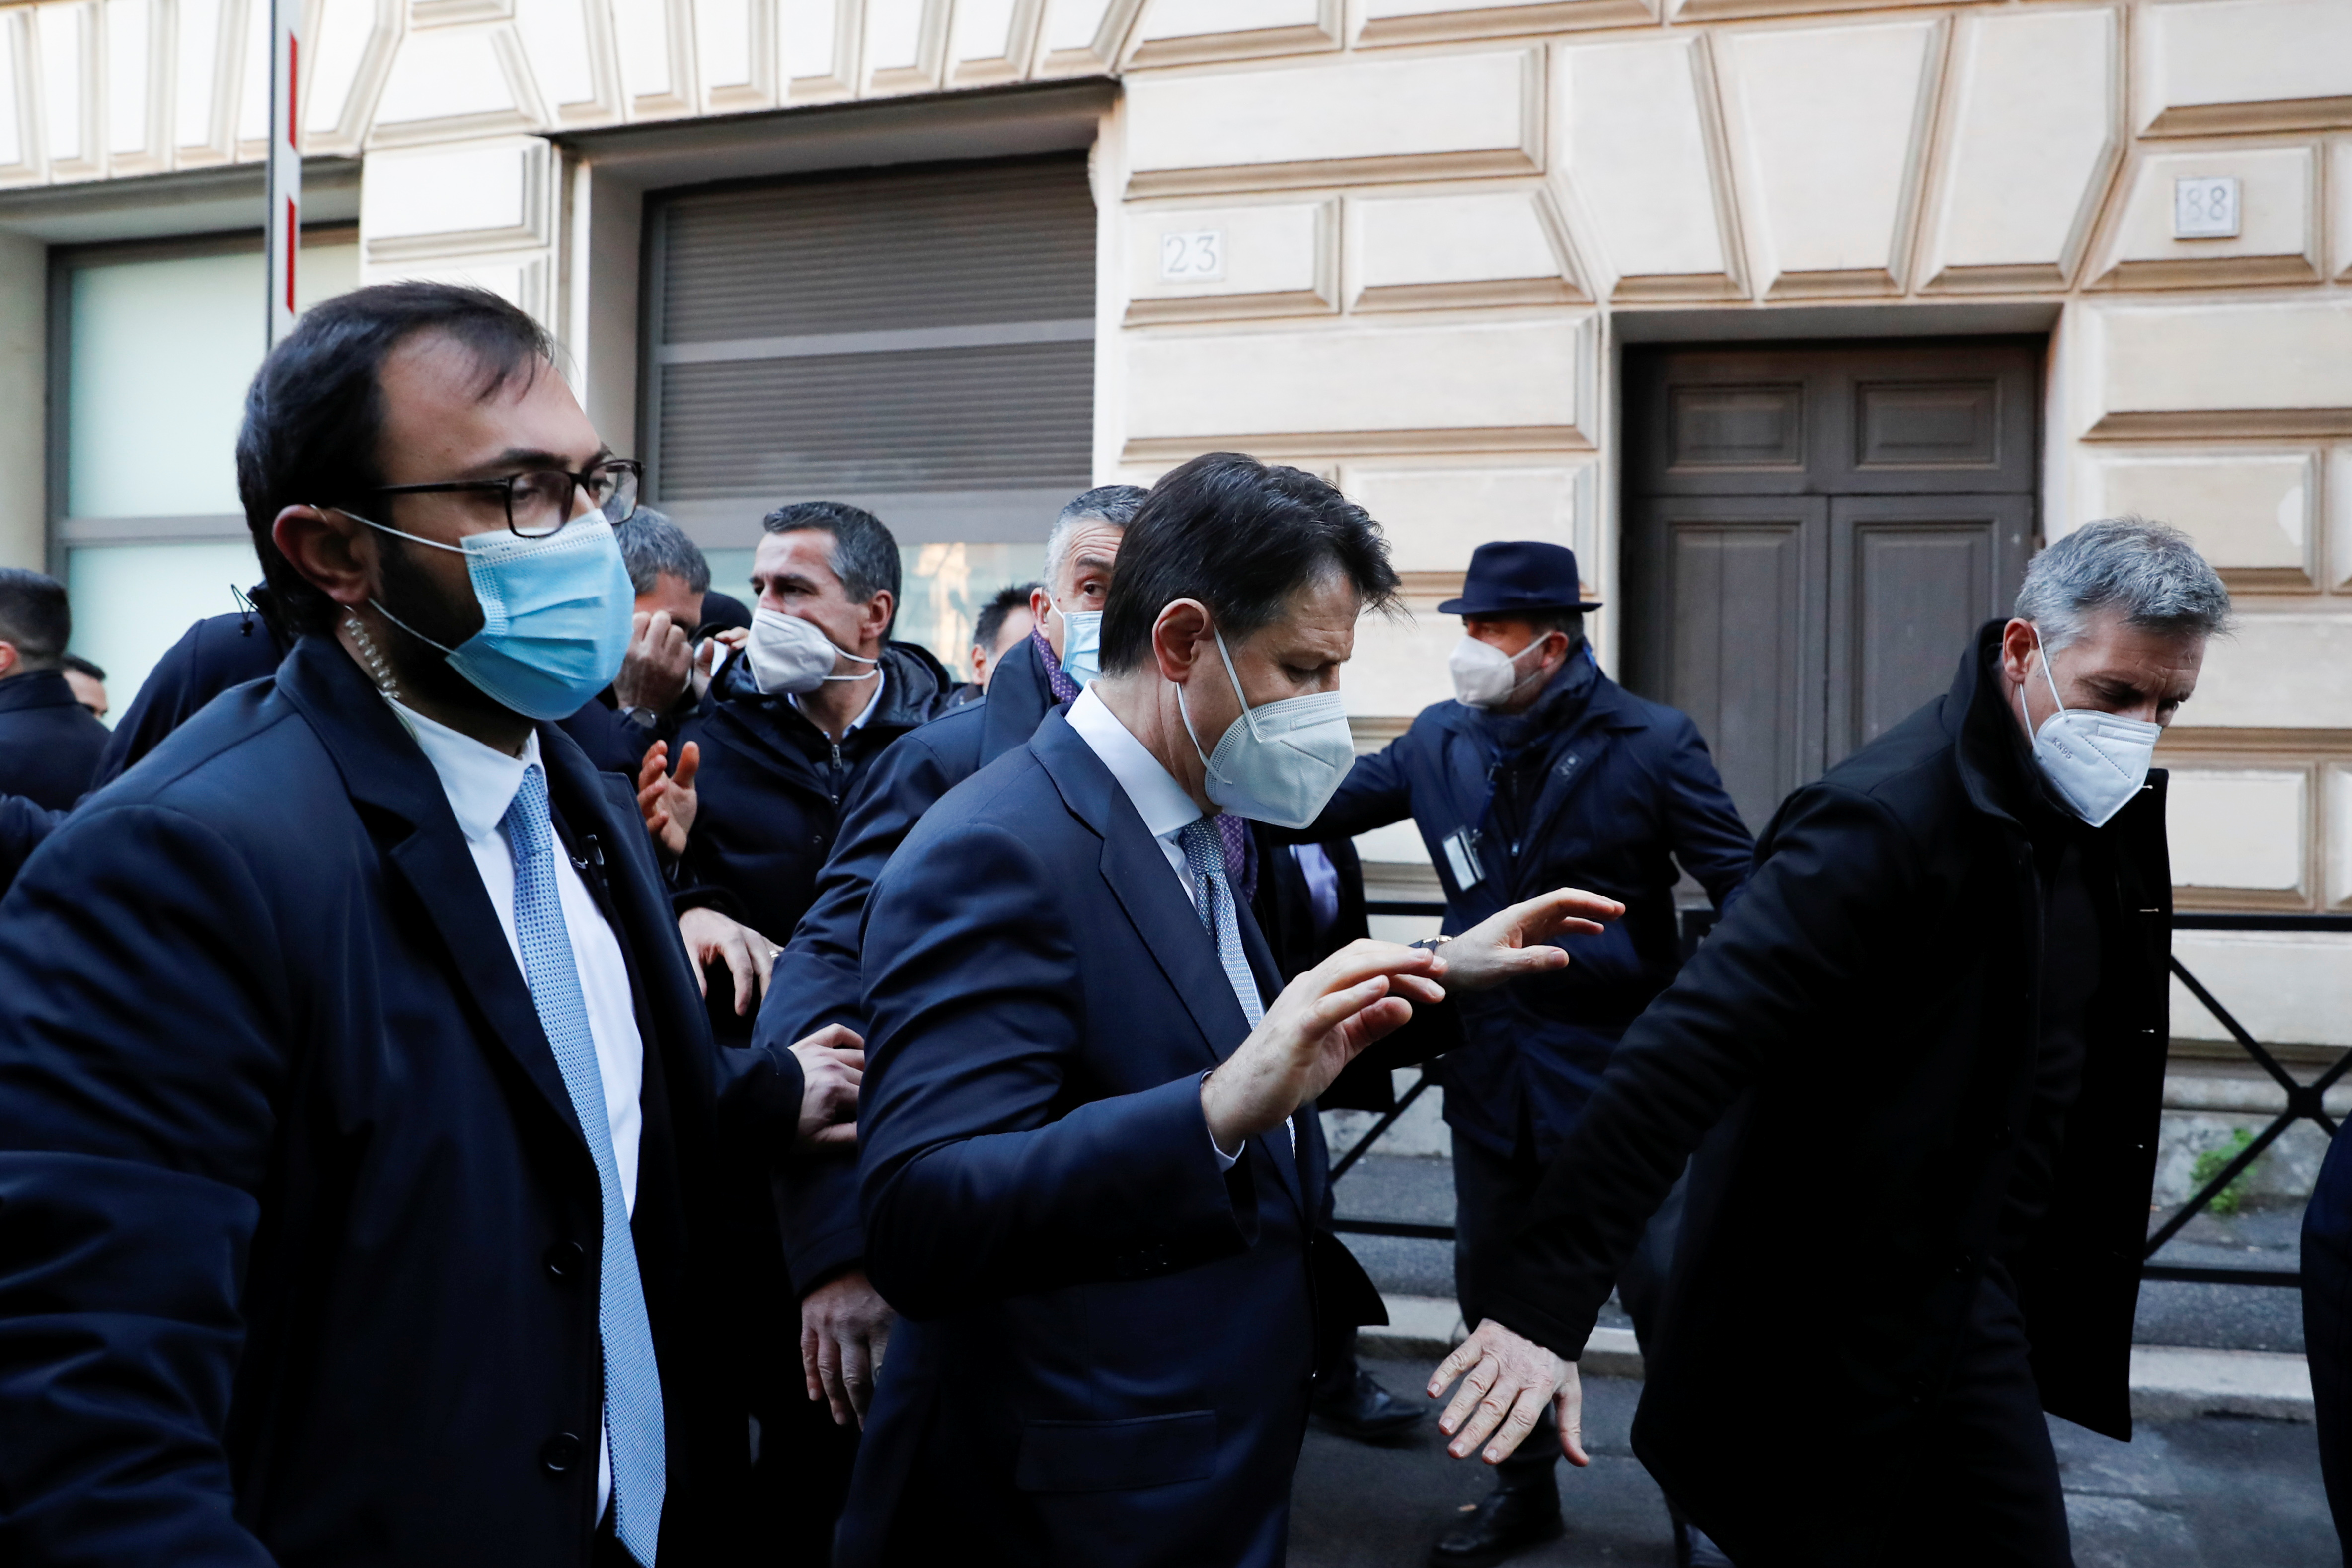 Italian Prime Minister Giuseppe Conte arrives to the Prime Minister's Office in Rome